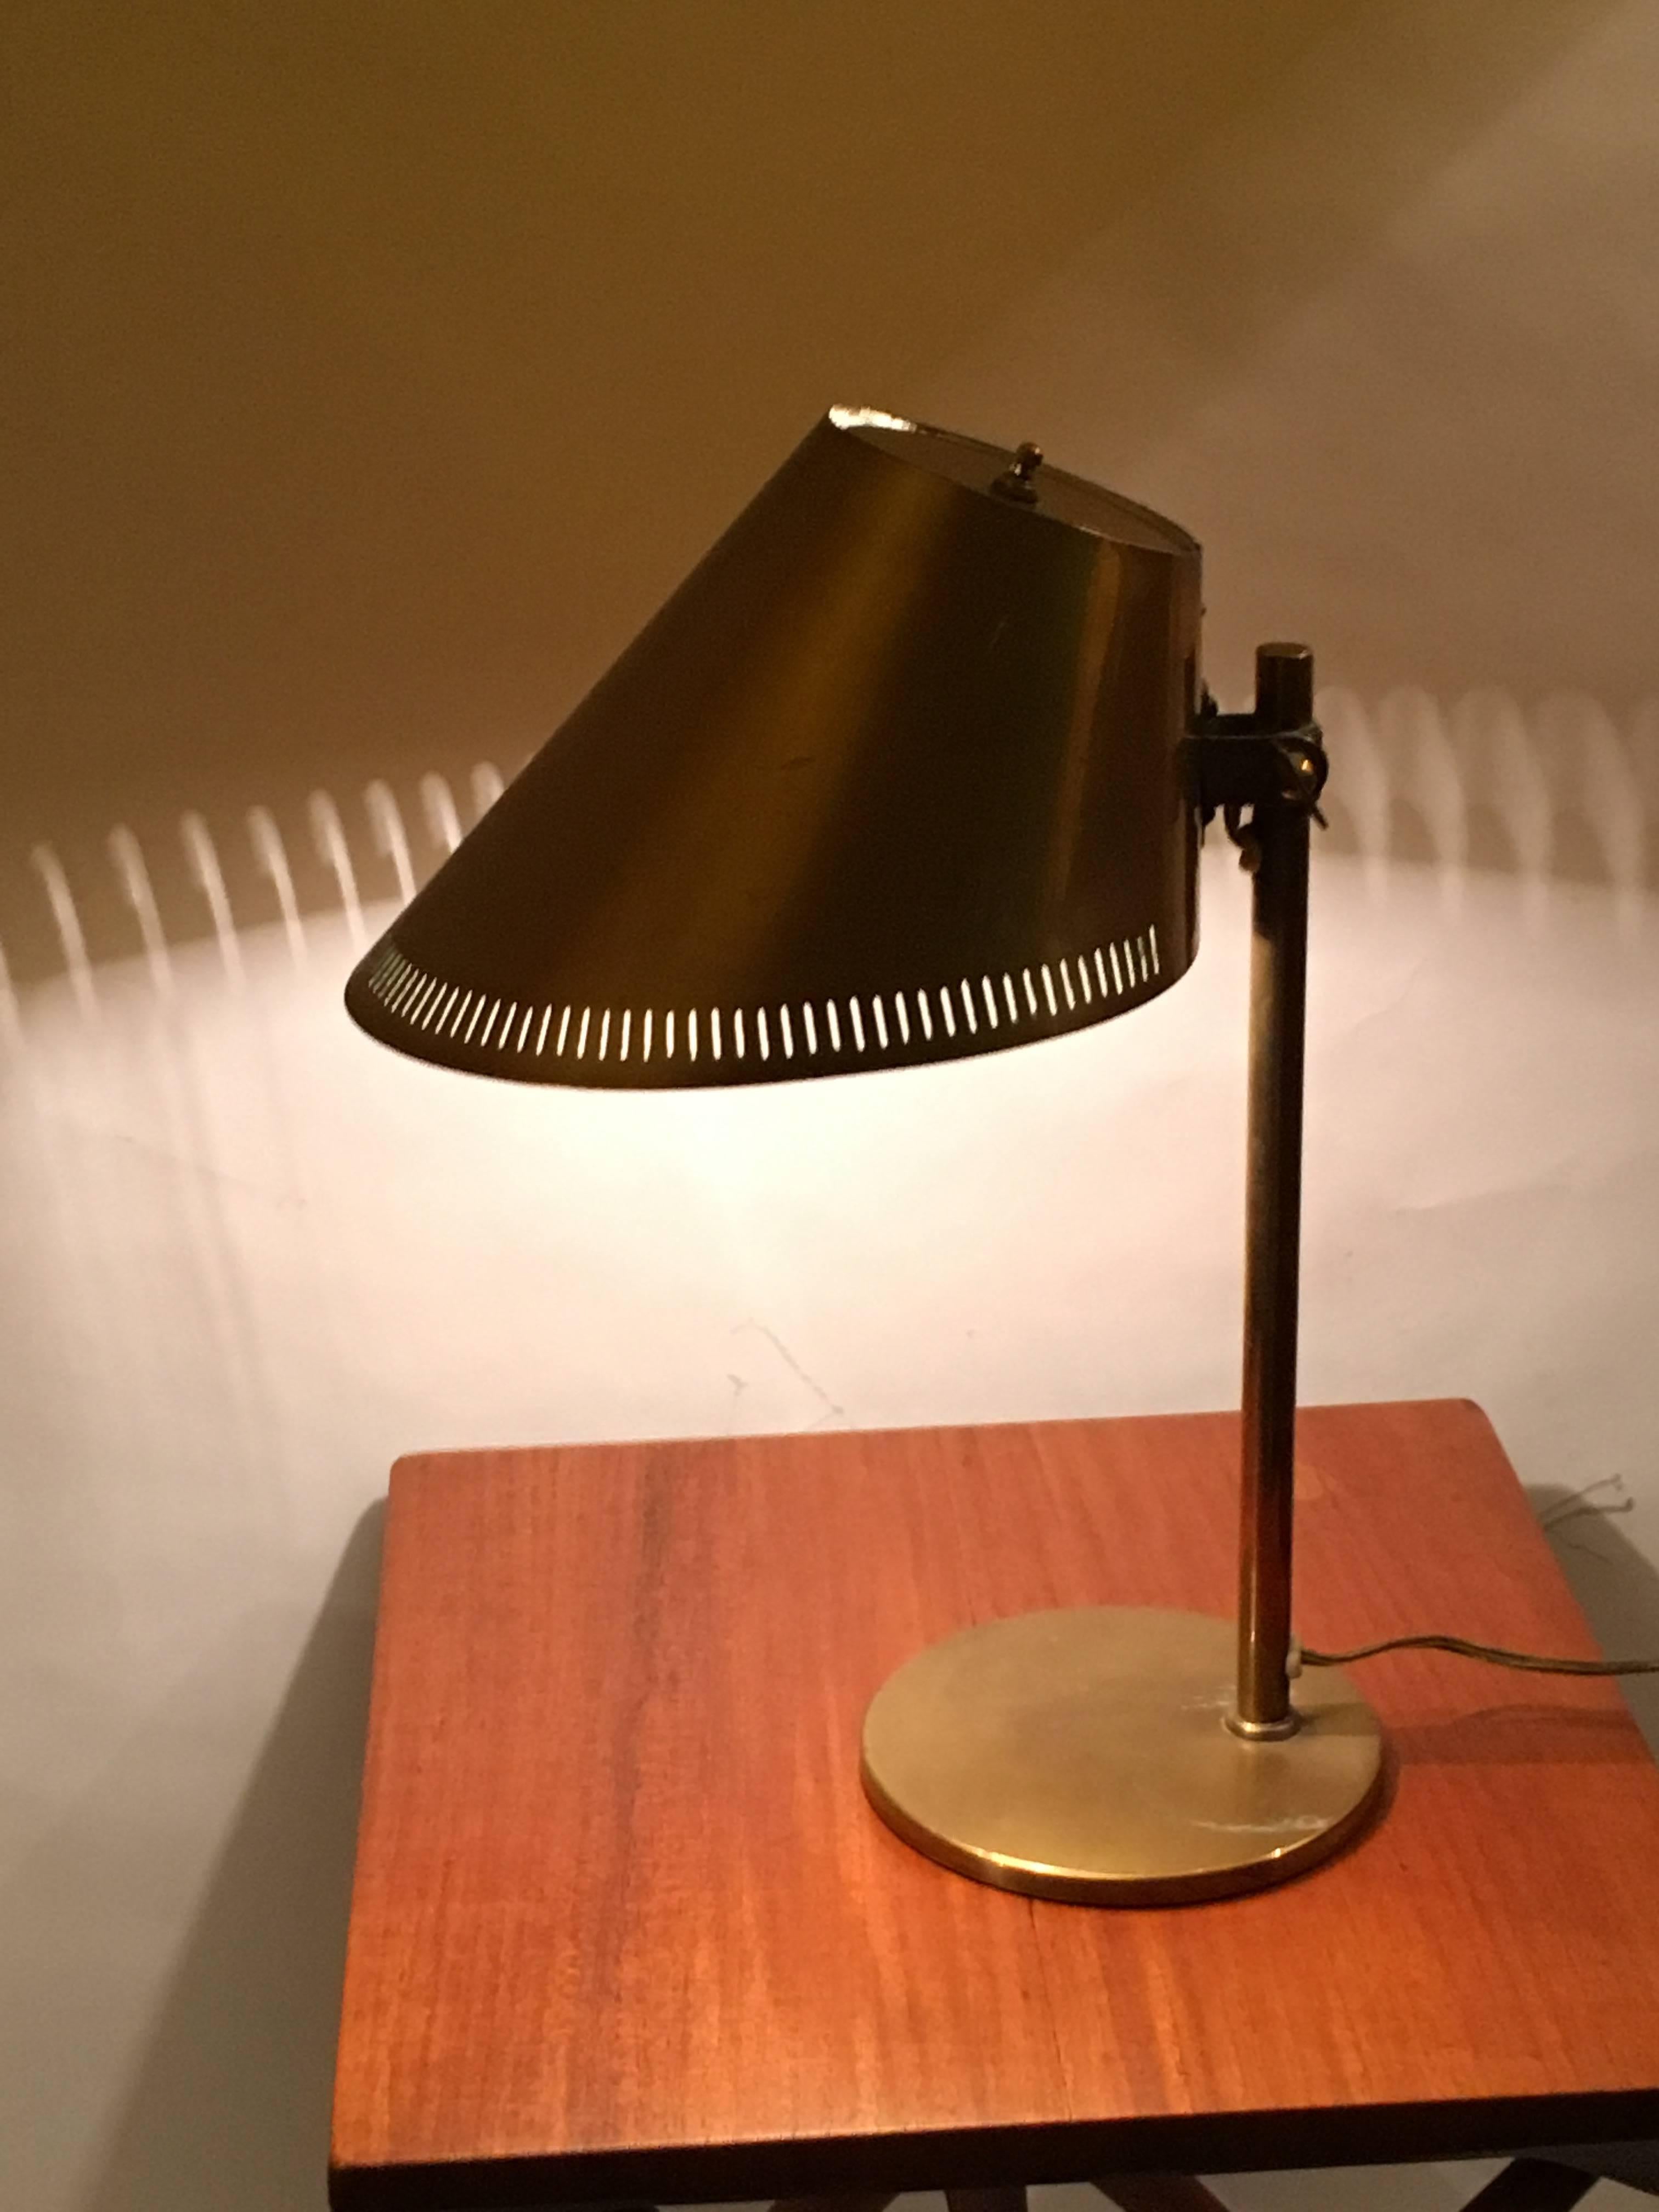 Hand-Crafted Paavo Tynell All Brass Desk Lamp, Model 9227, Taito, Finland, circa 1958 For Sale